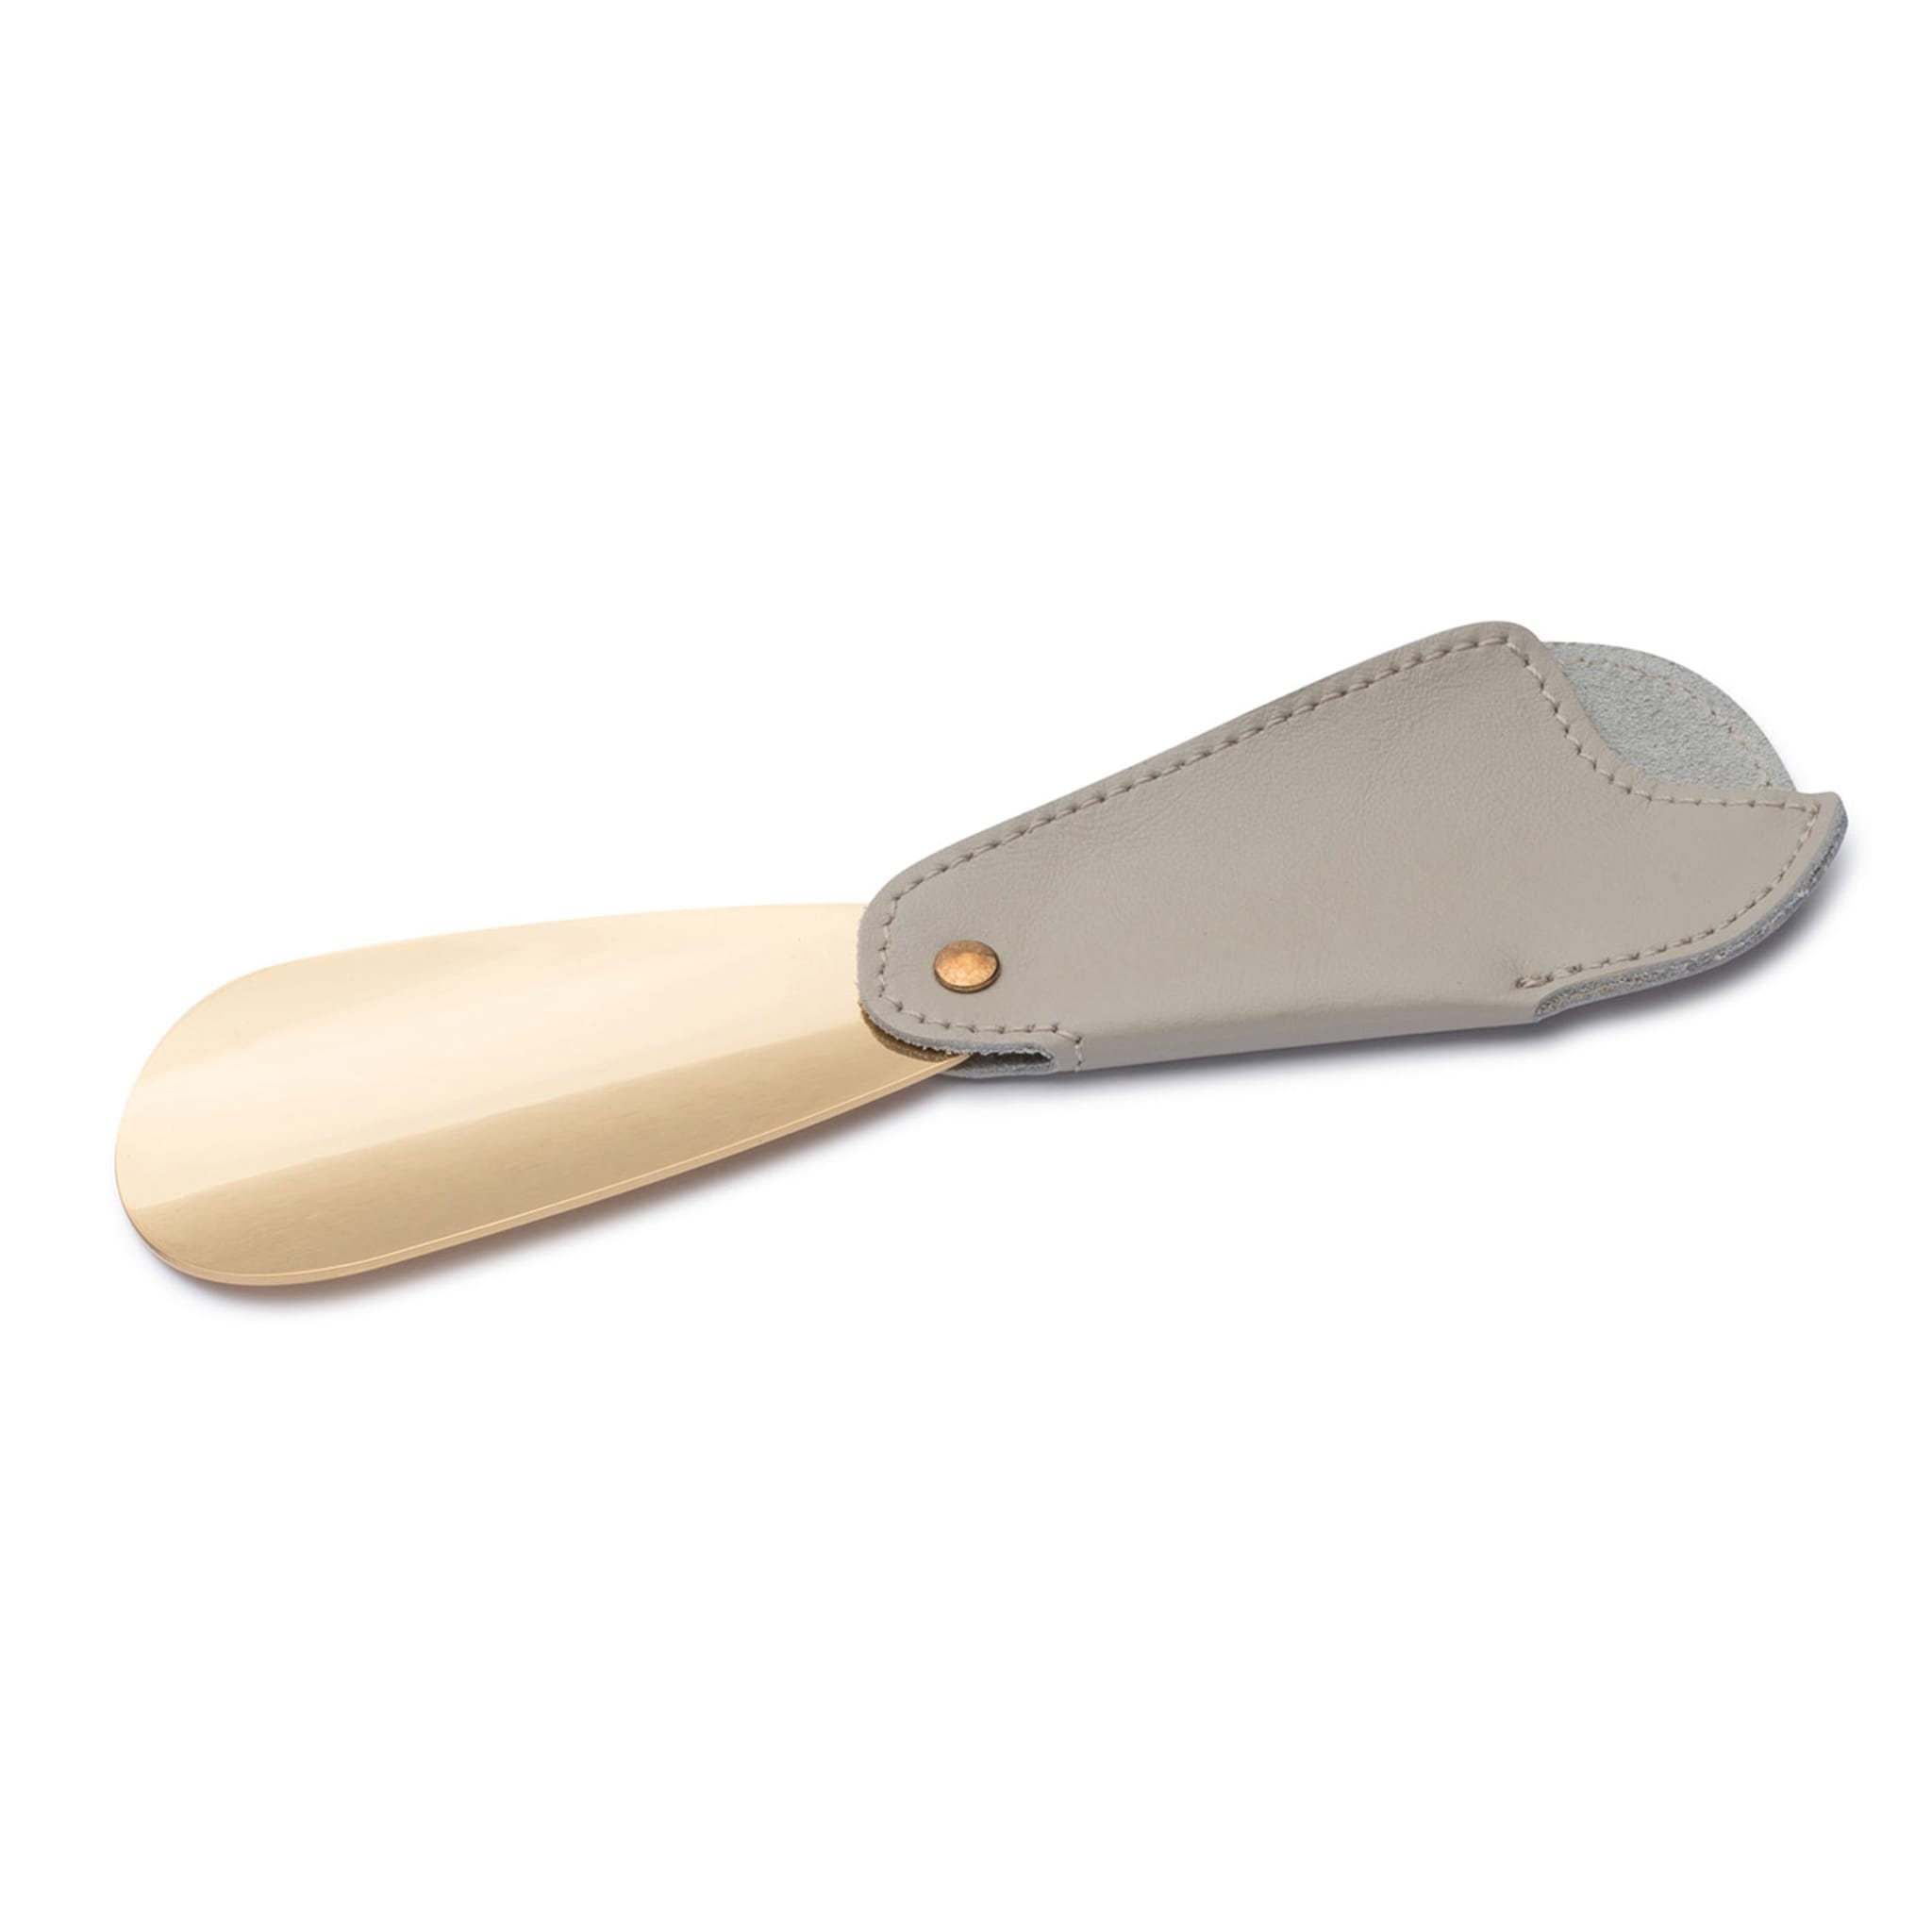 Gold & Gray Leather Travel Shoe Horn - Alternative view 1